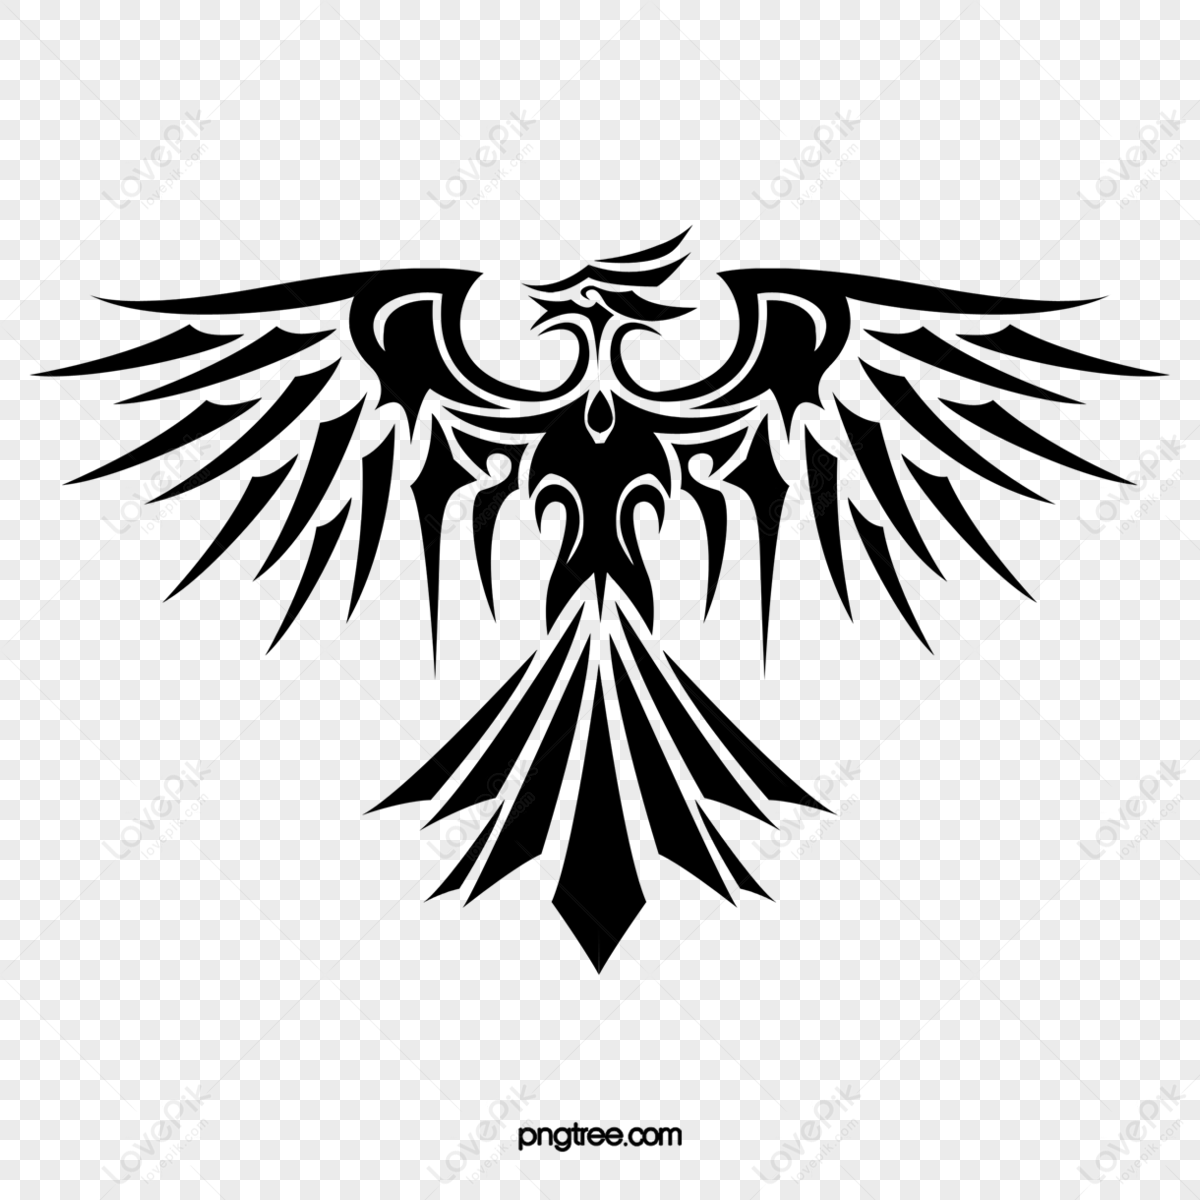 Phoenix Vector Icon Illustration Wings Tattoo Spiritual Vector, Wings,  Tattoo, Spiritual PNG and Vector with Transparent Background for Free  Download